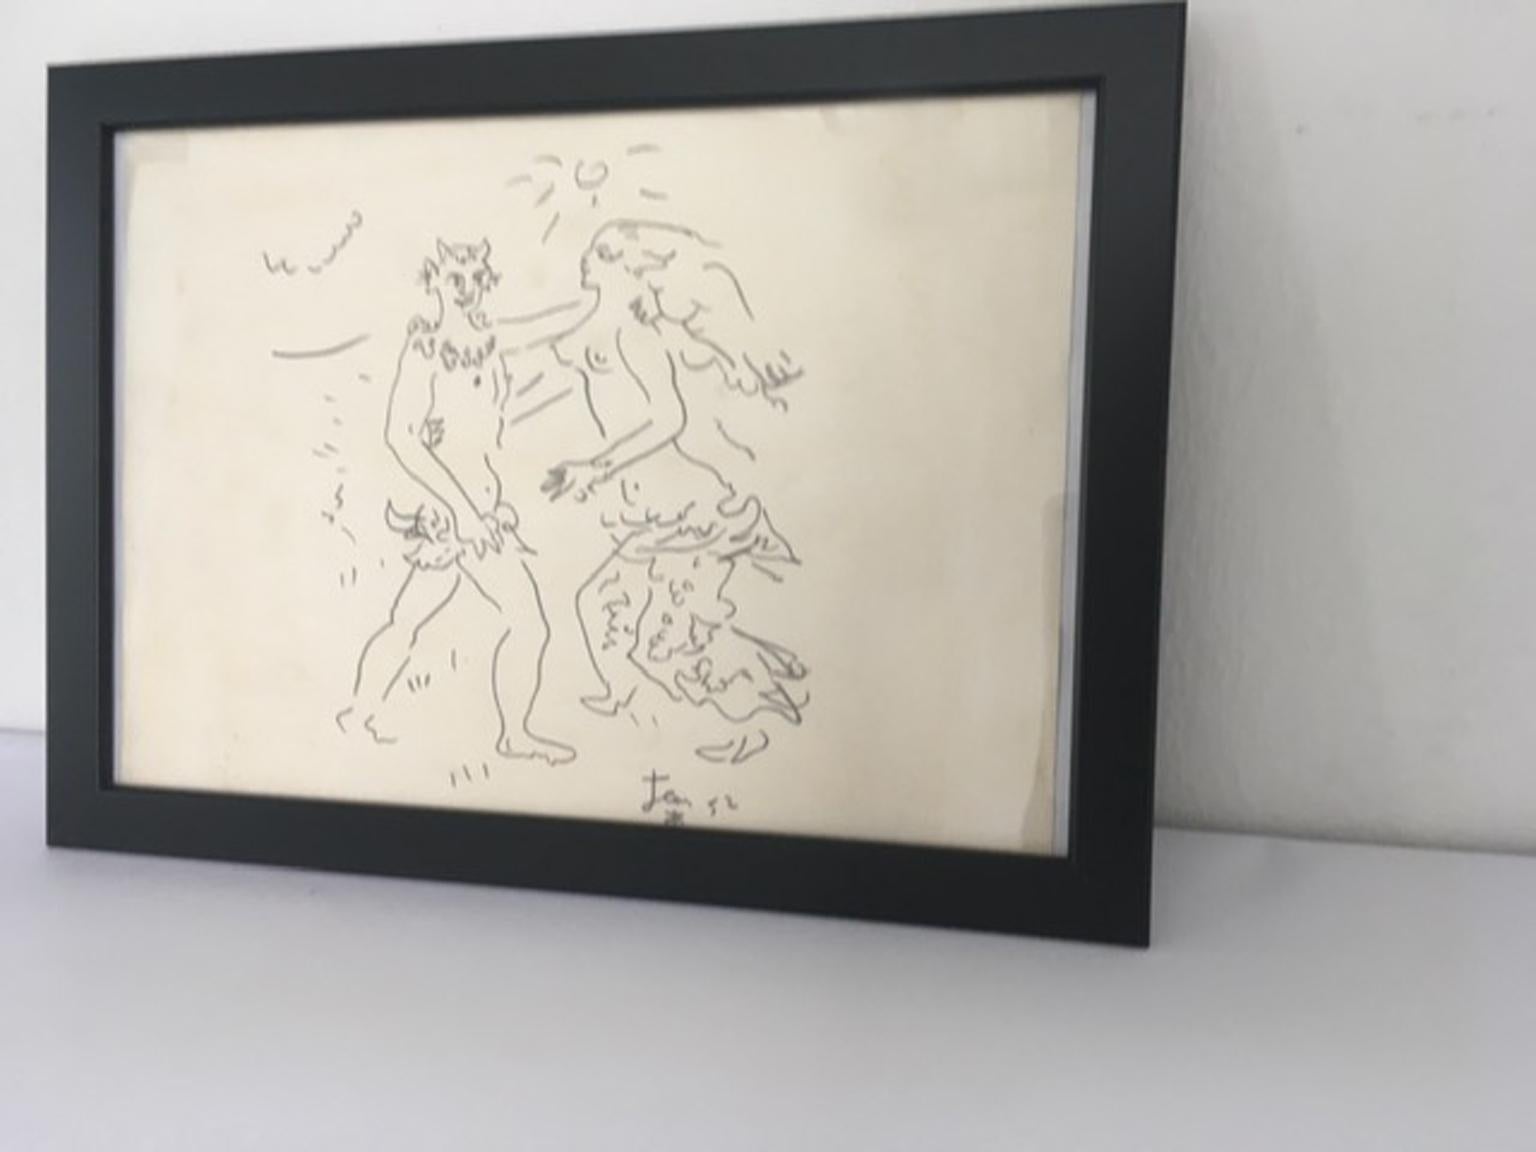 This delicate drawing of the dance between a Faun and the Nimph, looks following the Jean Cocteau clean line drawings.
We can see in this scene,  the grace and simplicity of the Neoclassical fantastic world.